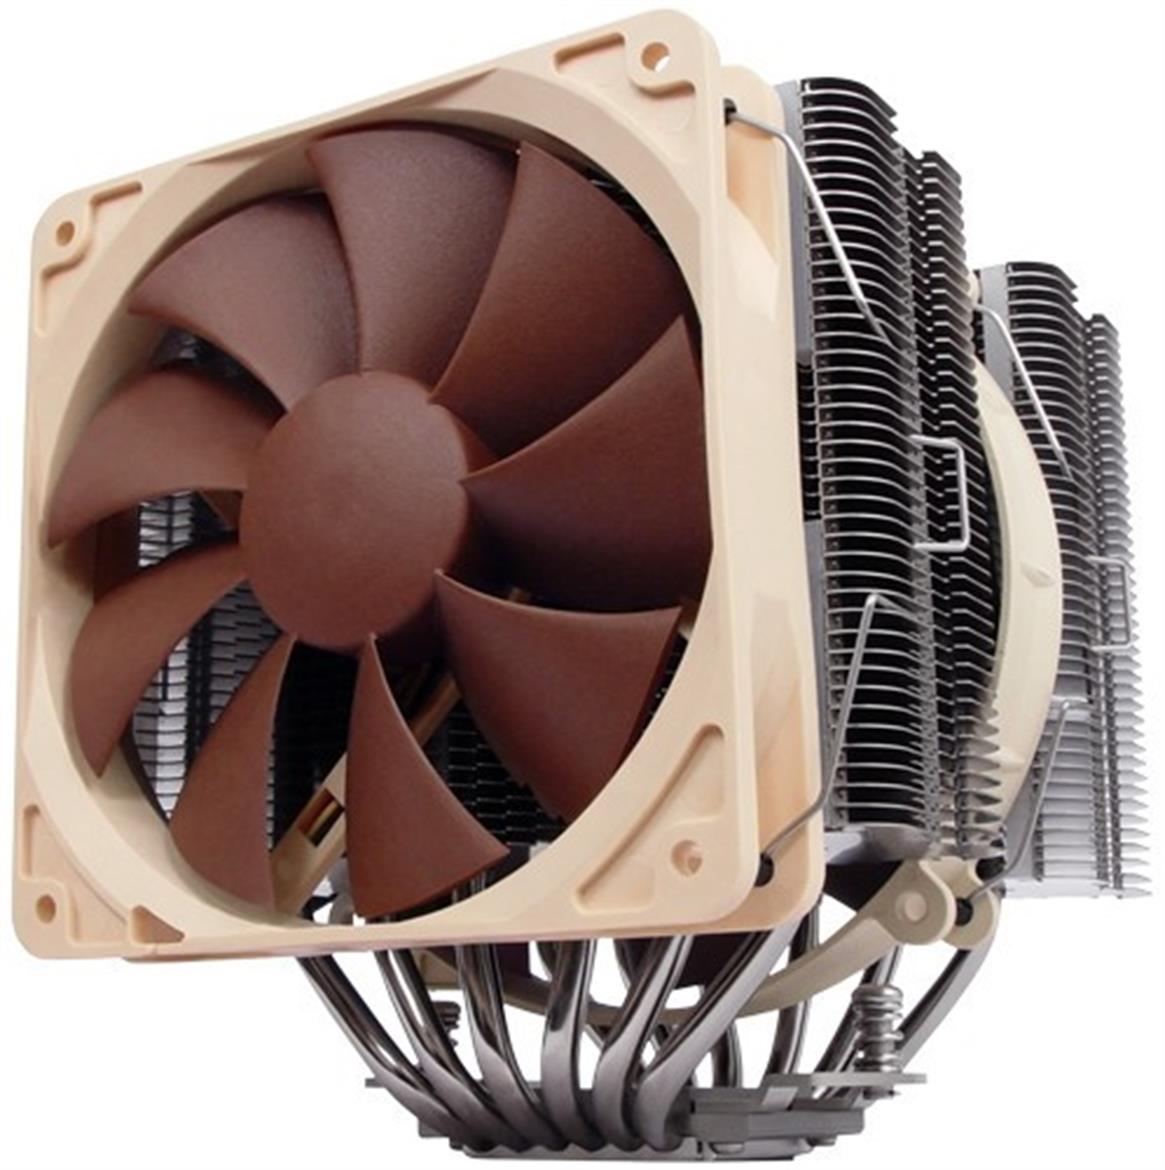 Noctua's DH-14: Air Cooling Keeps Up With Liquid?